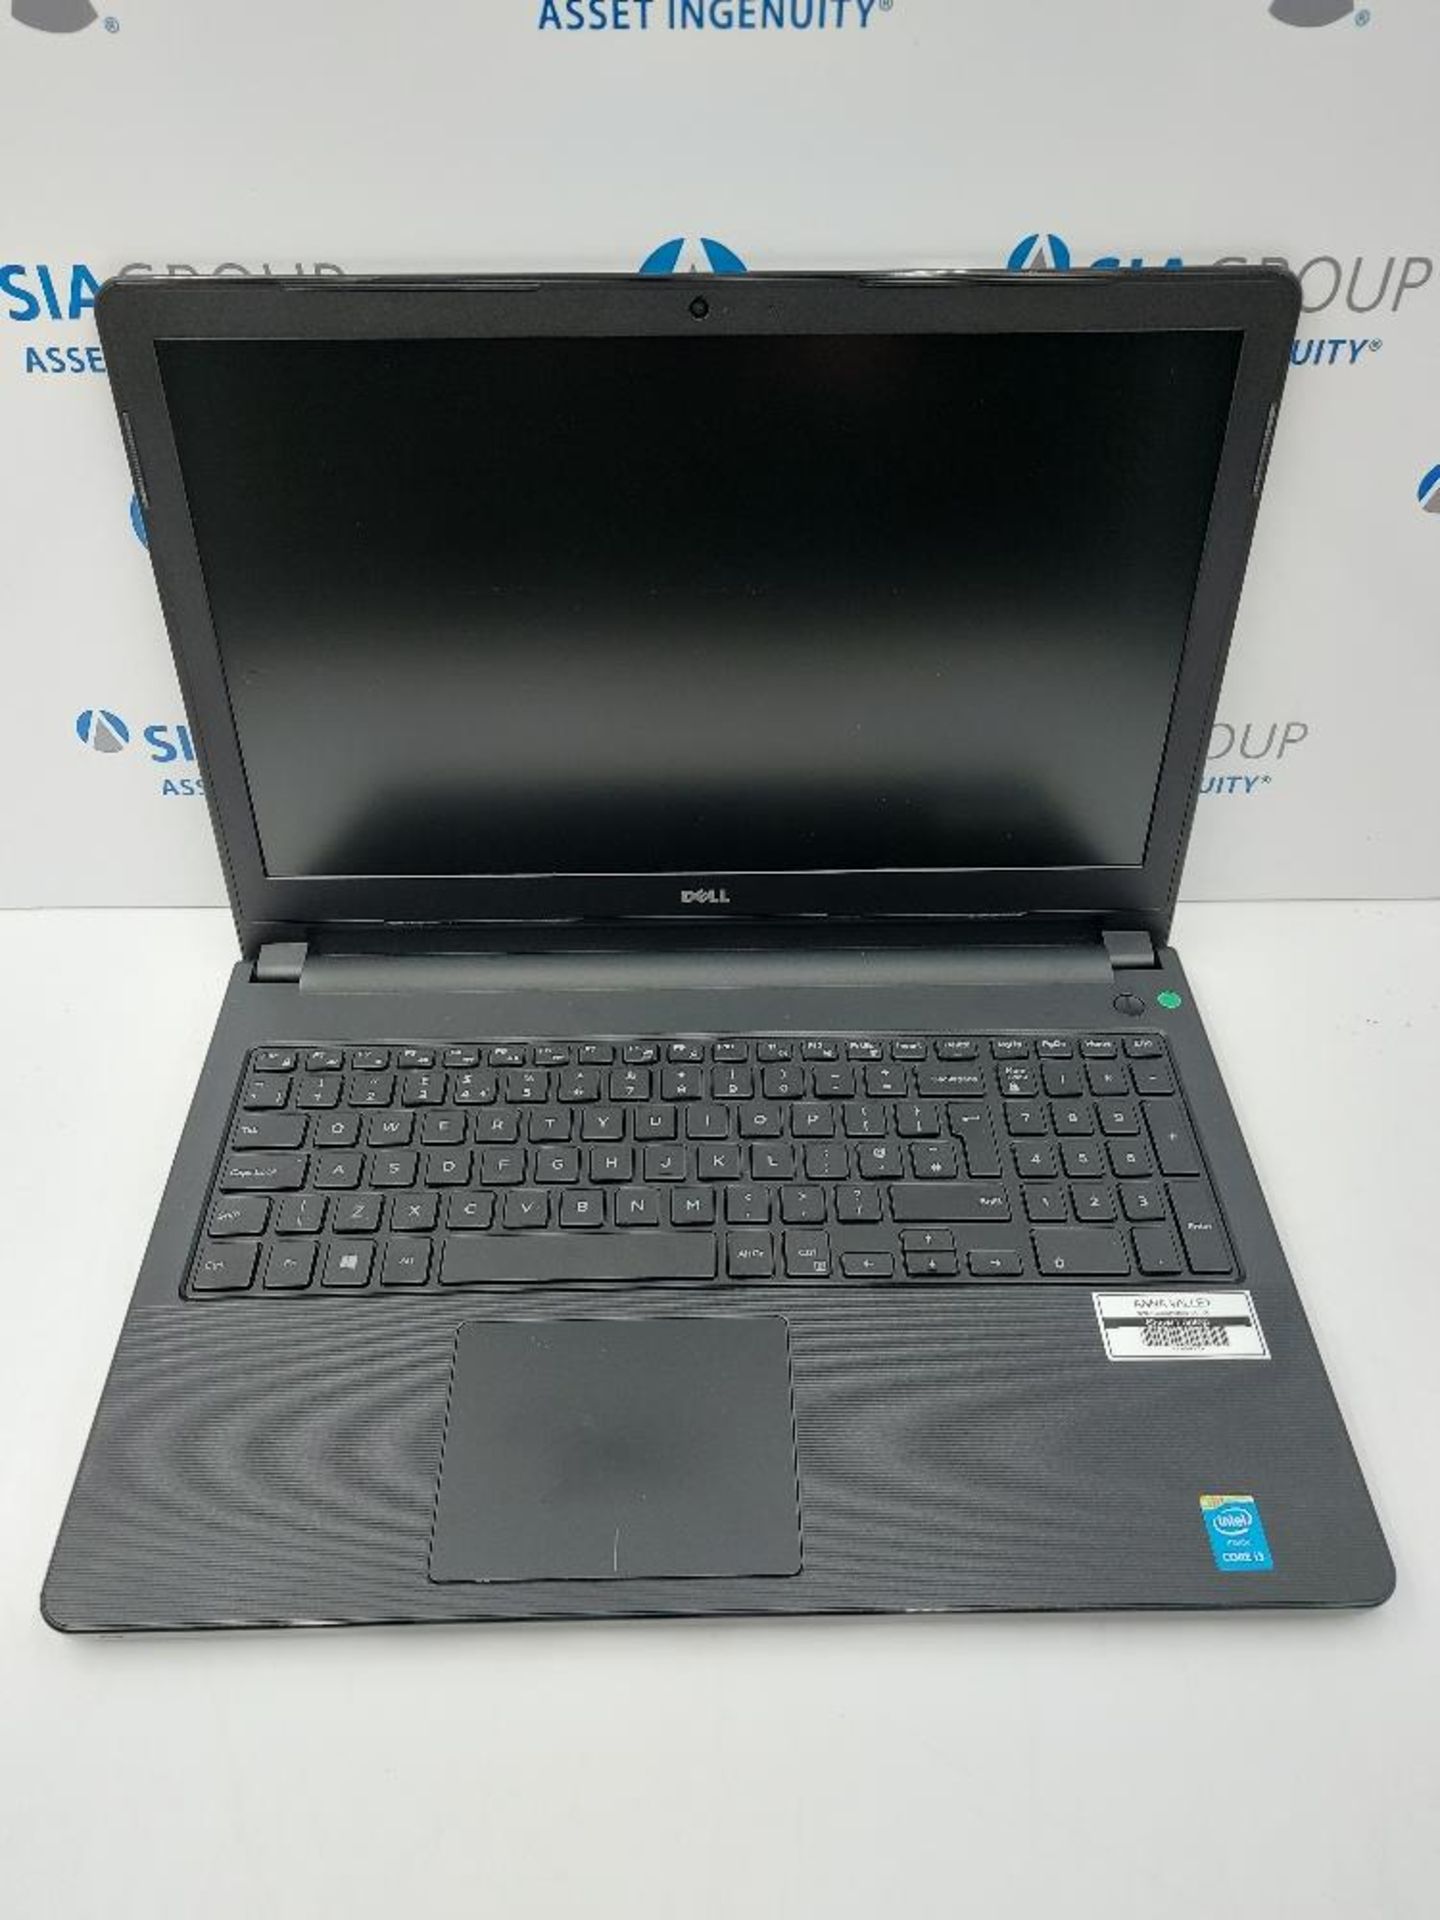 Damaged Dell Vostro Windows 7 Laptop with Peli Case - Image 3 of 7